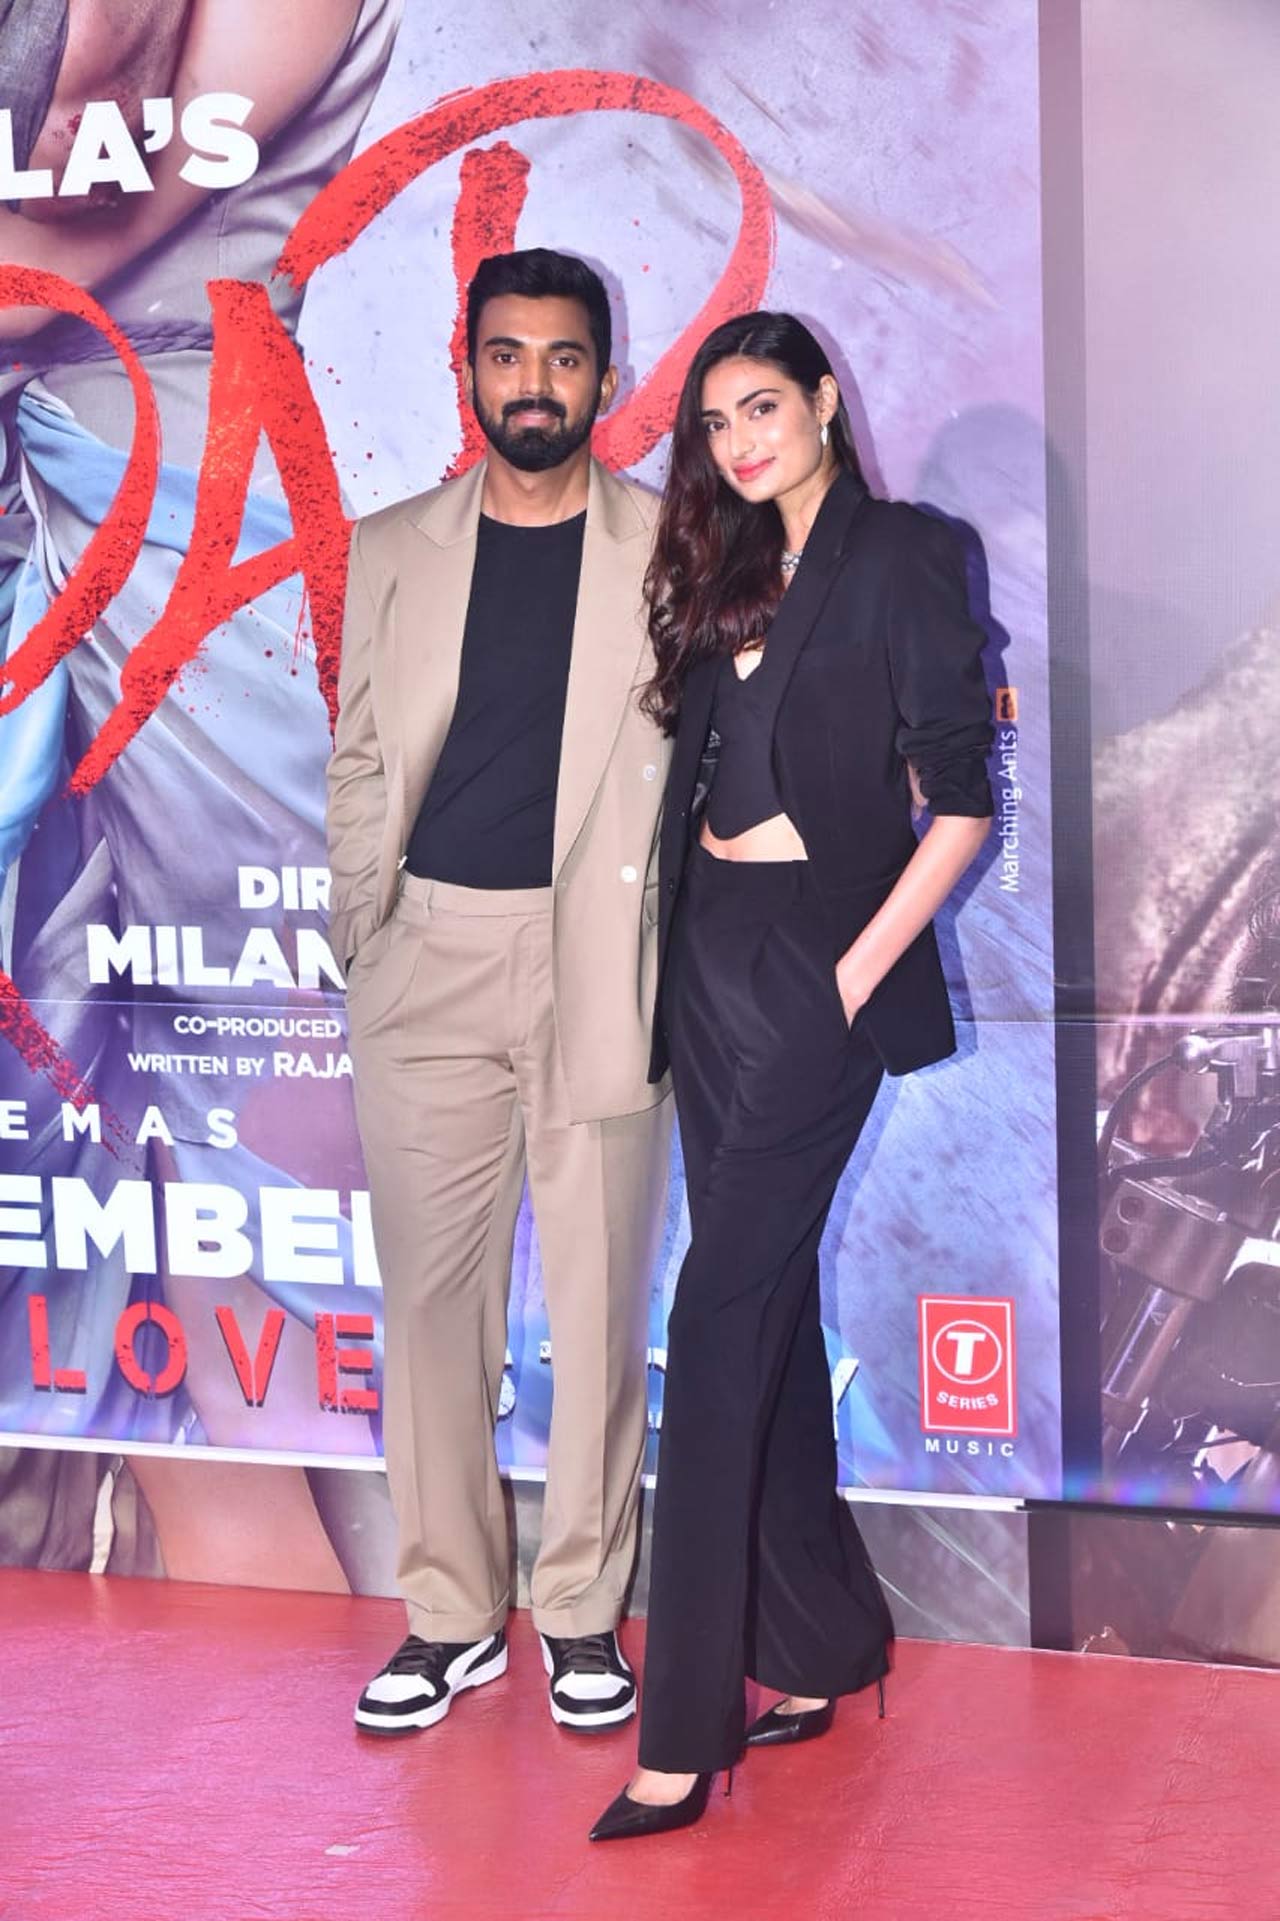 KL Rahul and Athiya Shetty made their public appearance together amidst relationship rumours at the screening. While KL Rahul opted for a casual suit, Athiya stunned in a black pantsuit as she attended the premiere.